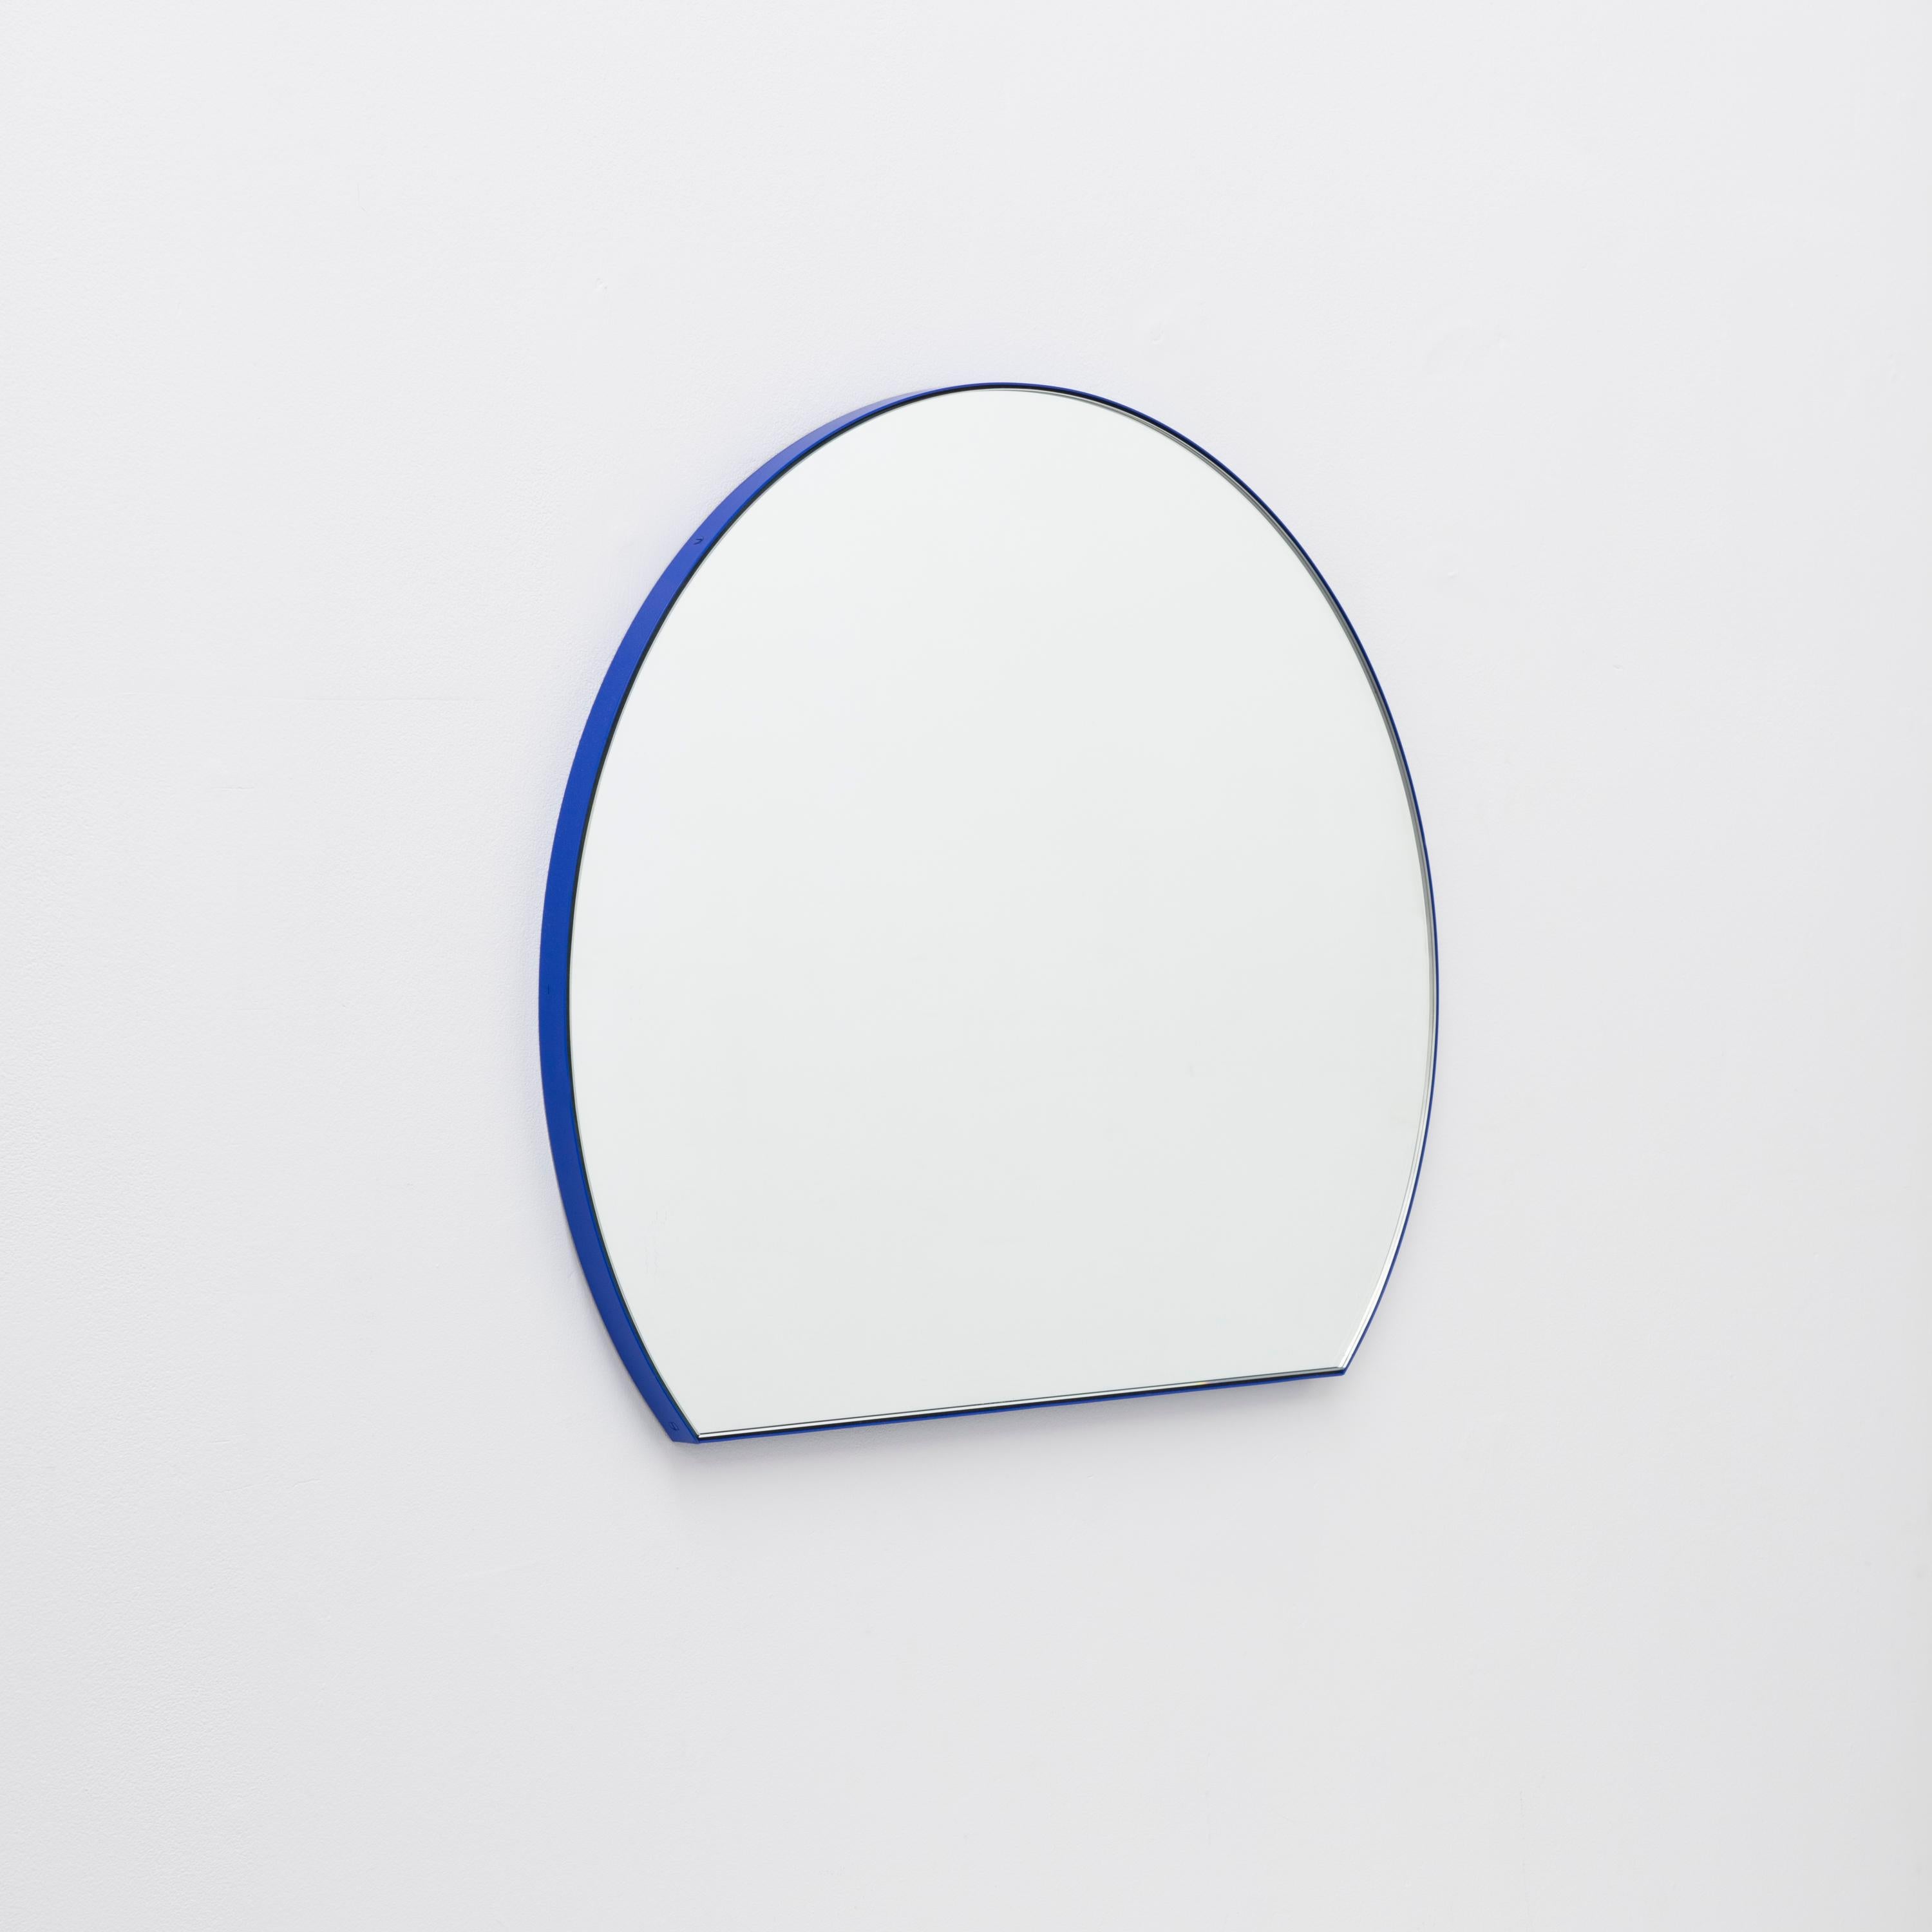 Powder-Coated Orbis Trecus Cropped Circular Modern Mirror with Blue Frame, Regular For Sale